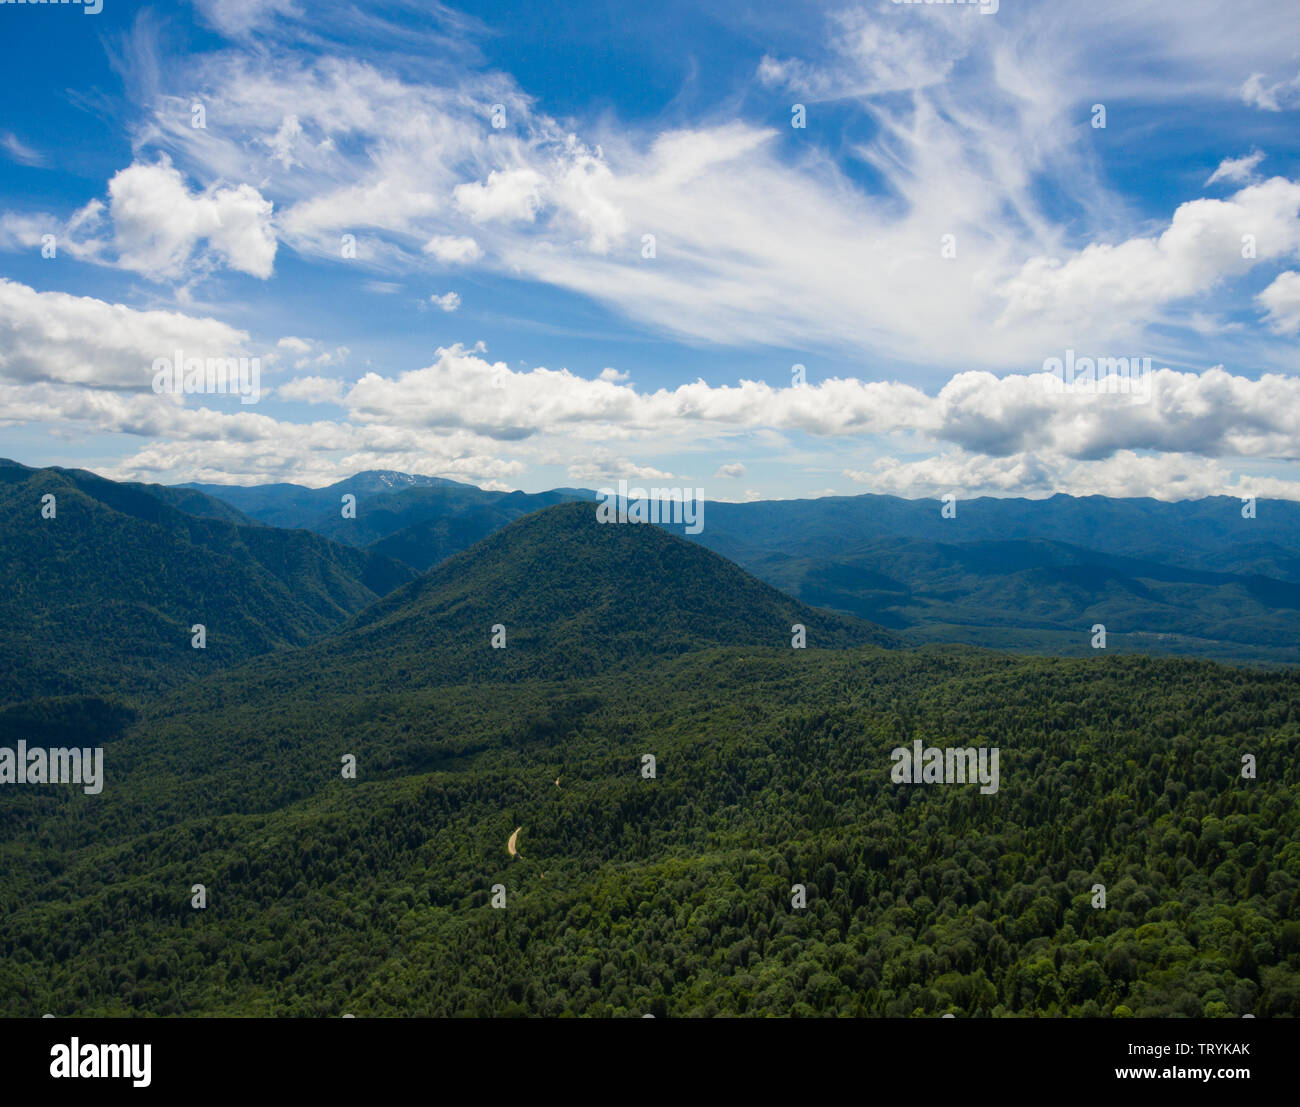 Aerial photo. Beautiful mountain valley. Summer landscape with mountain peaks covered with forest; cloudy sky and a segment of the road through the fo Stock Photo